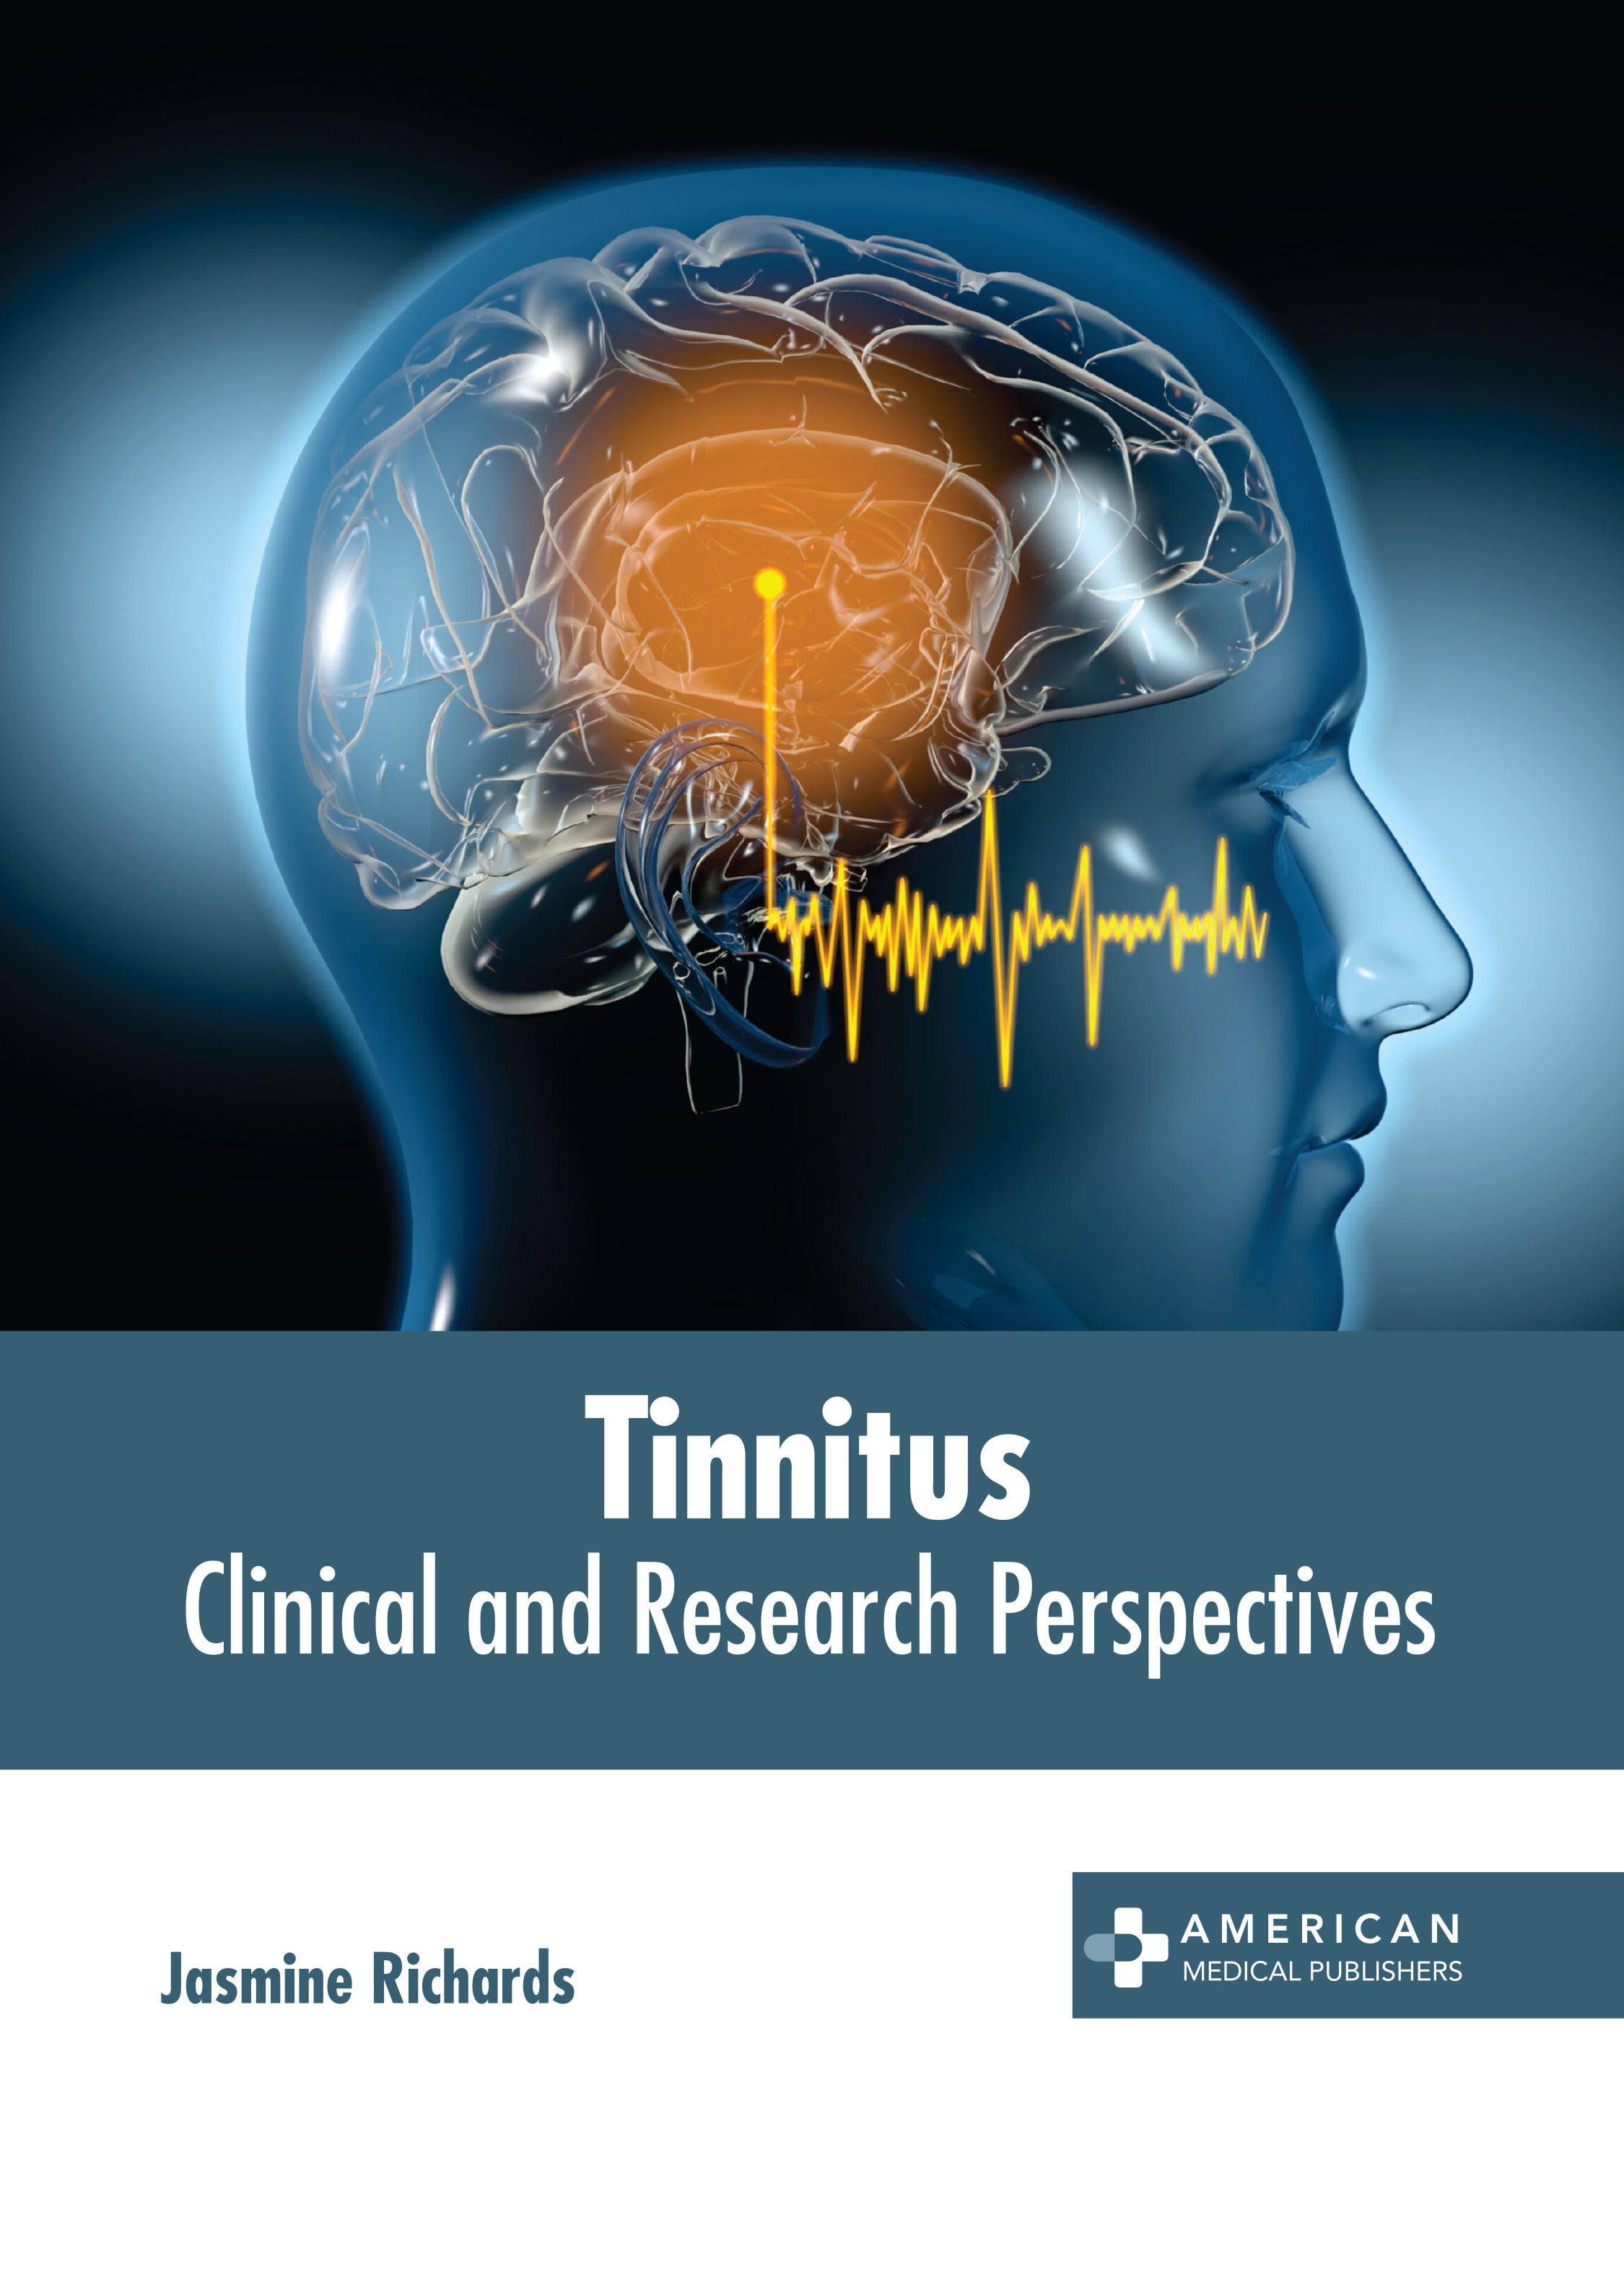 TINNITUS: CLINICAL AND RESEARCH PERSPECTIVES